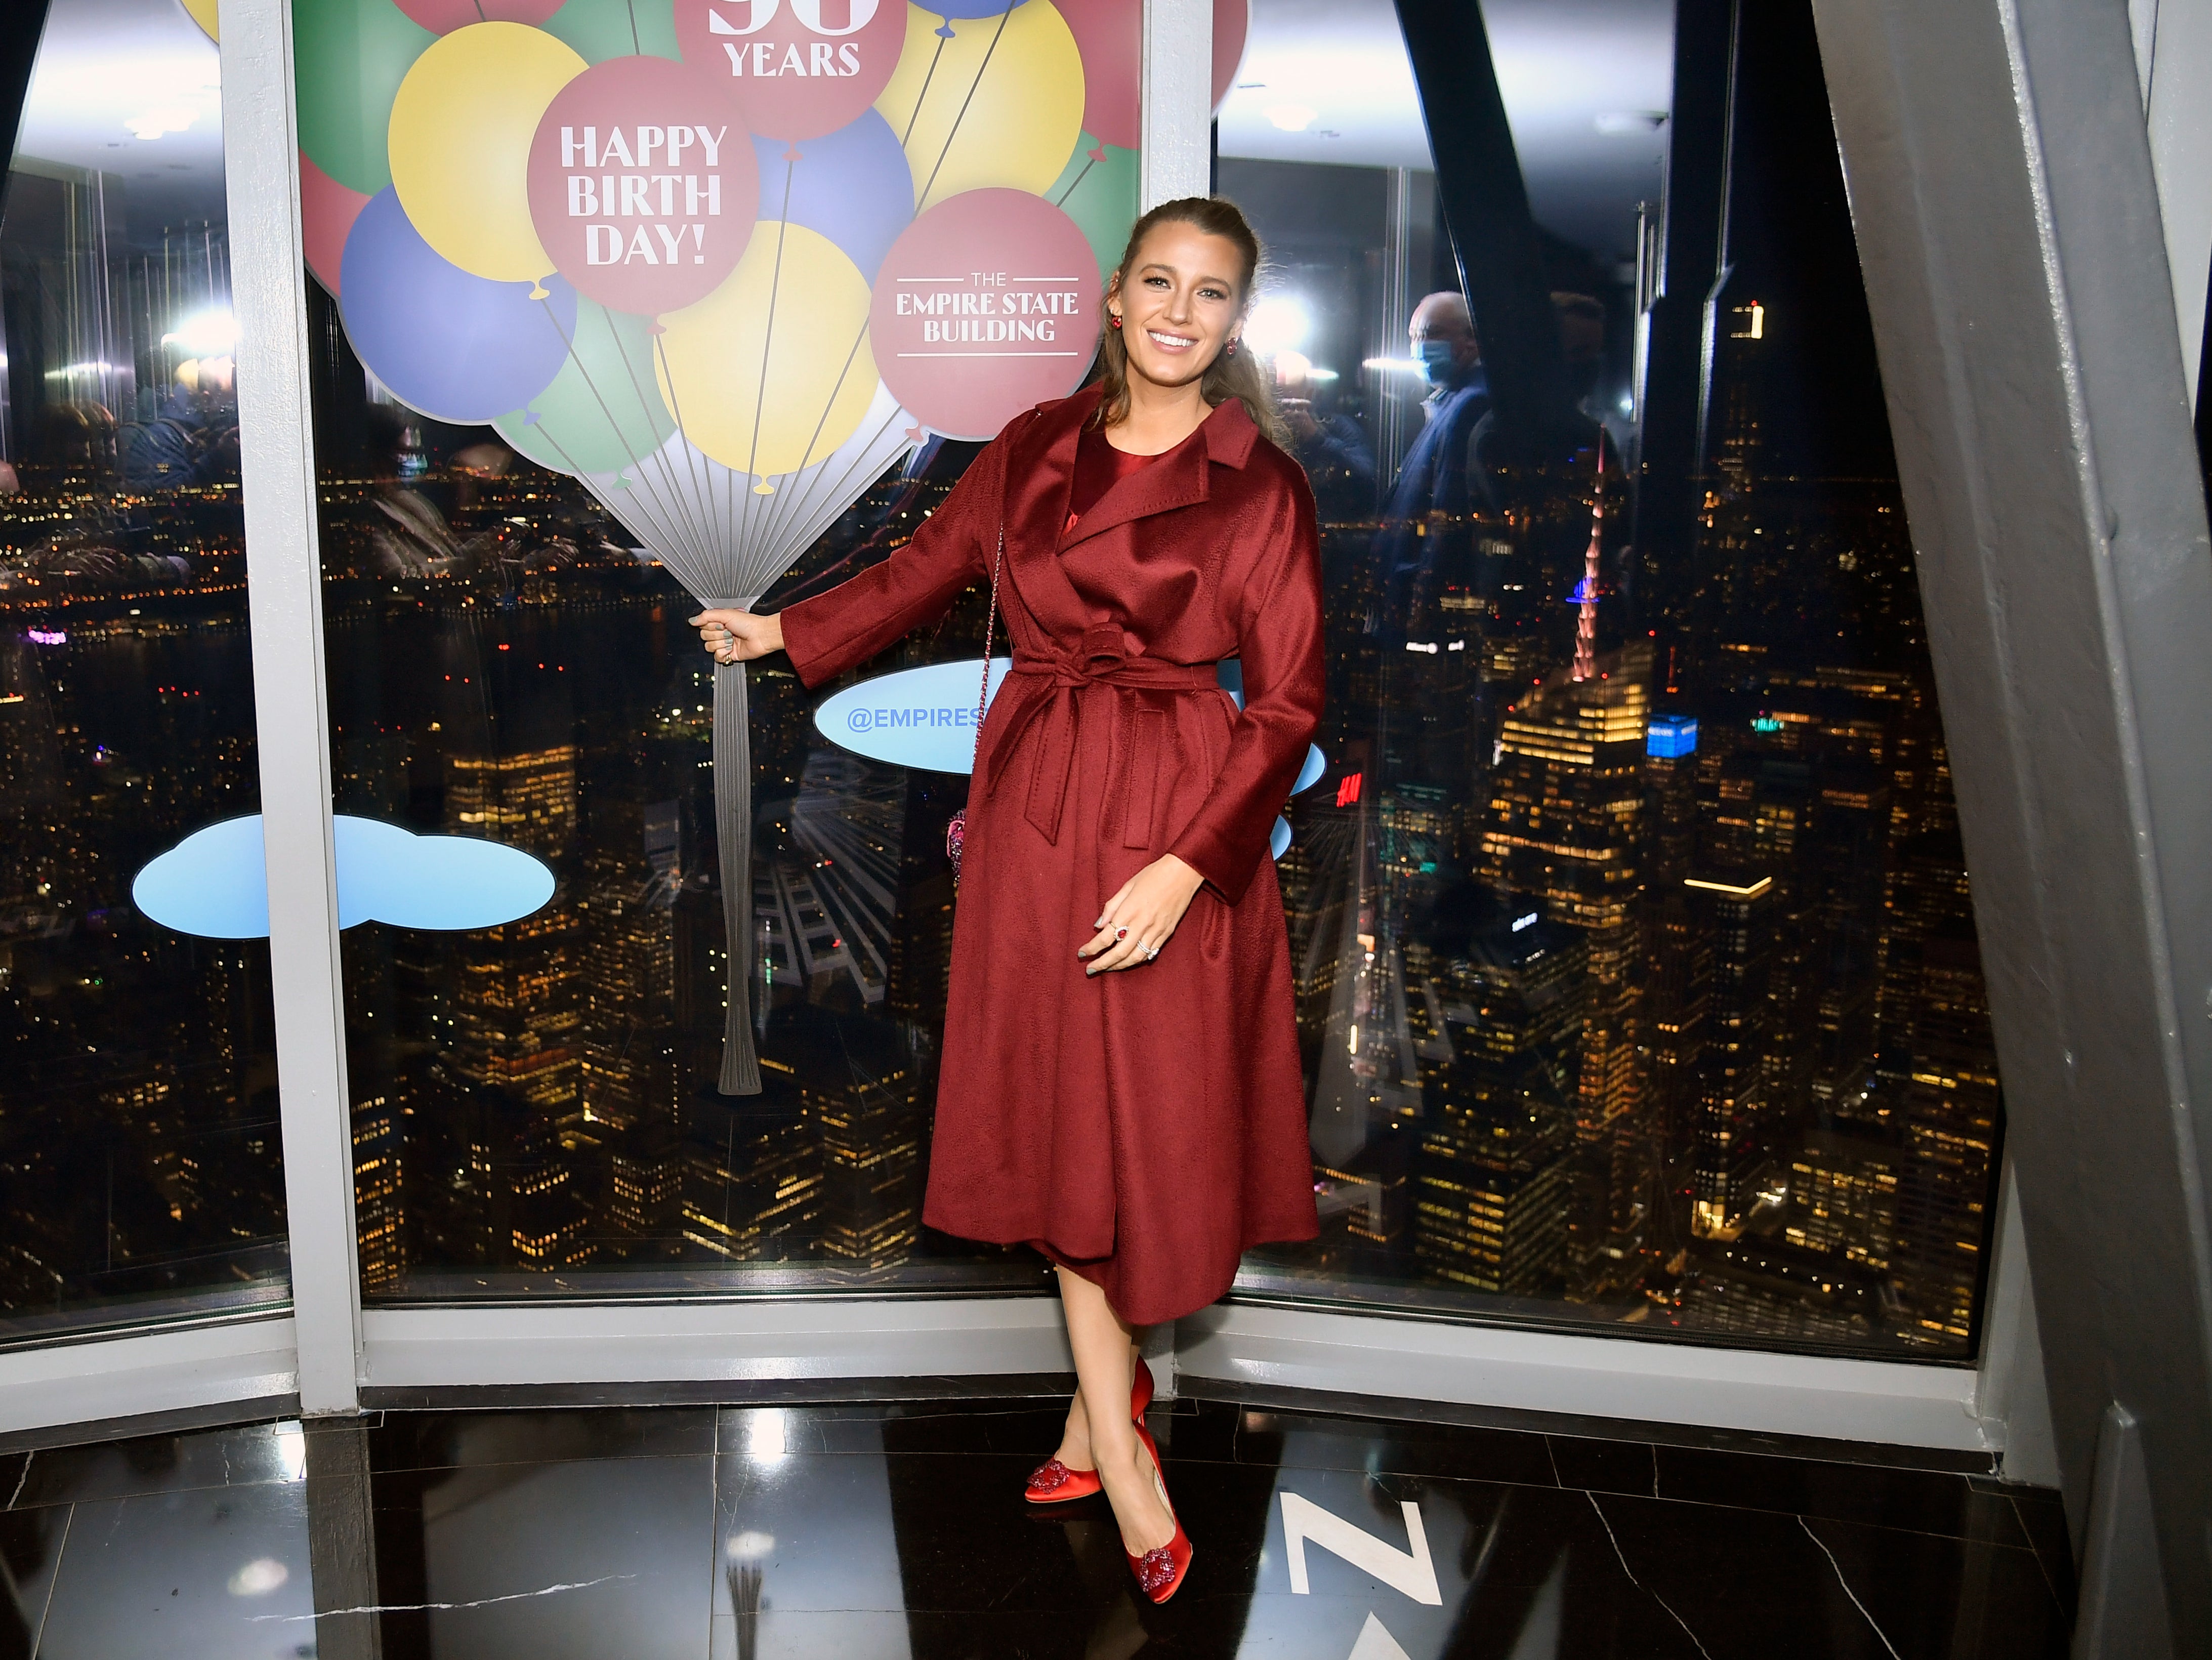 Blake Lively attends an event at the Empire State Building in New York City